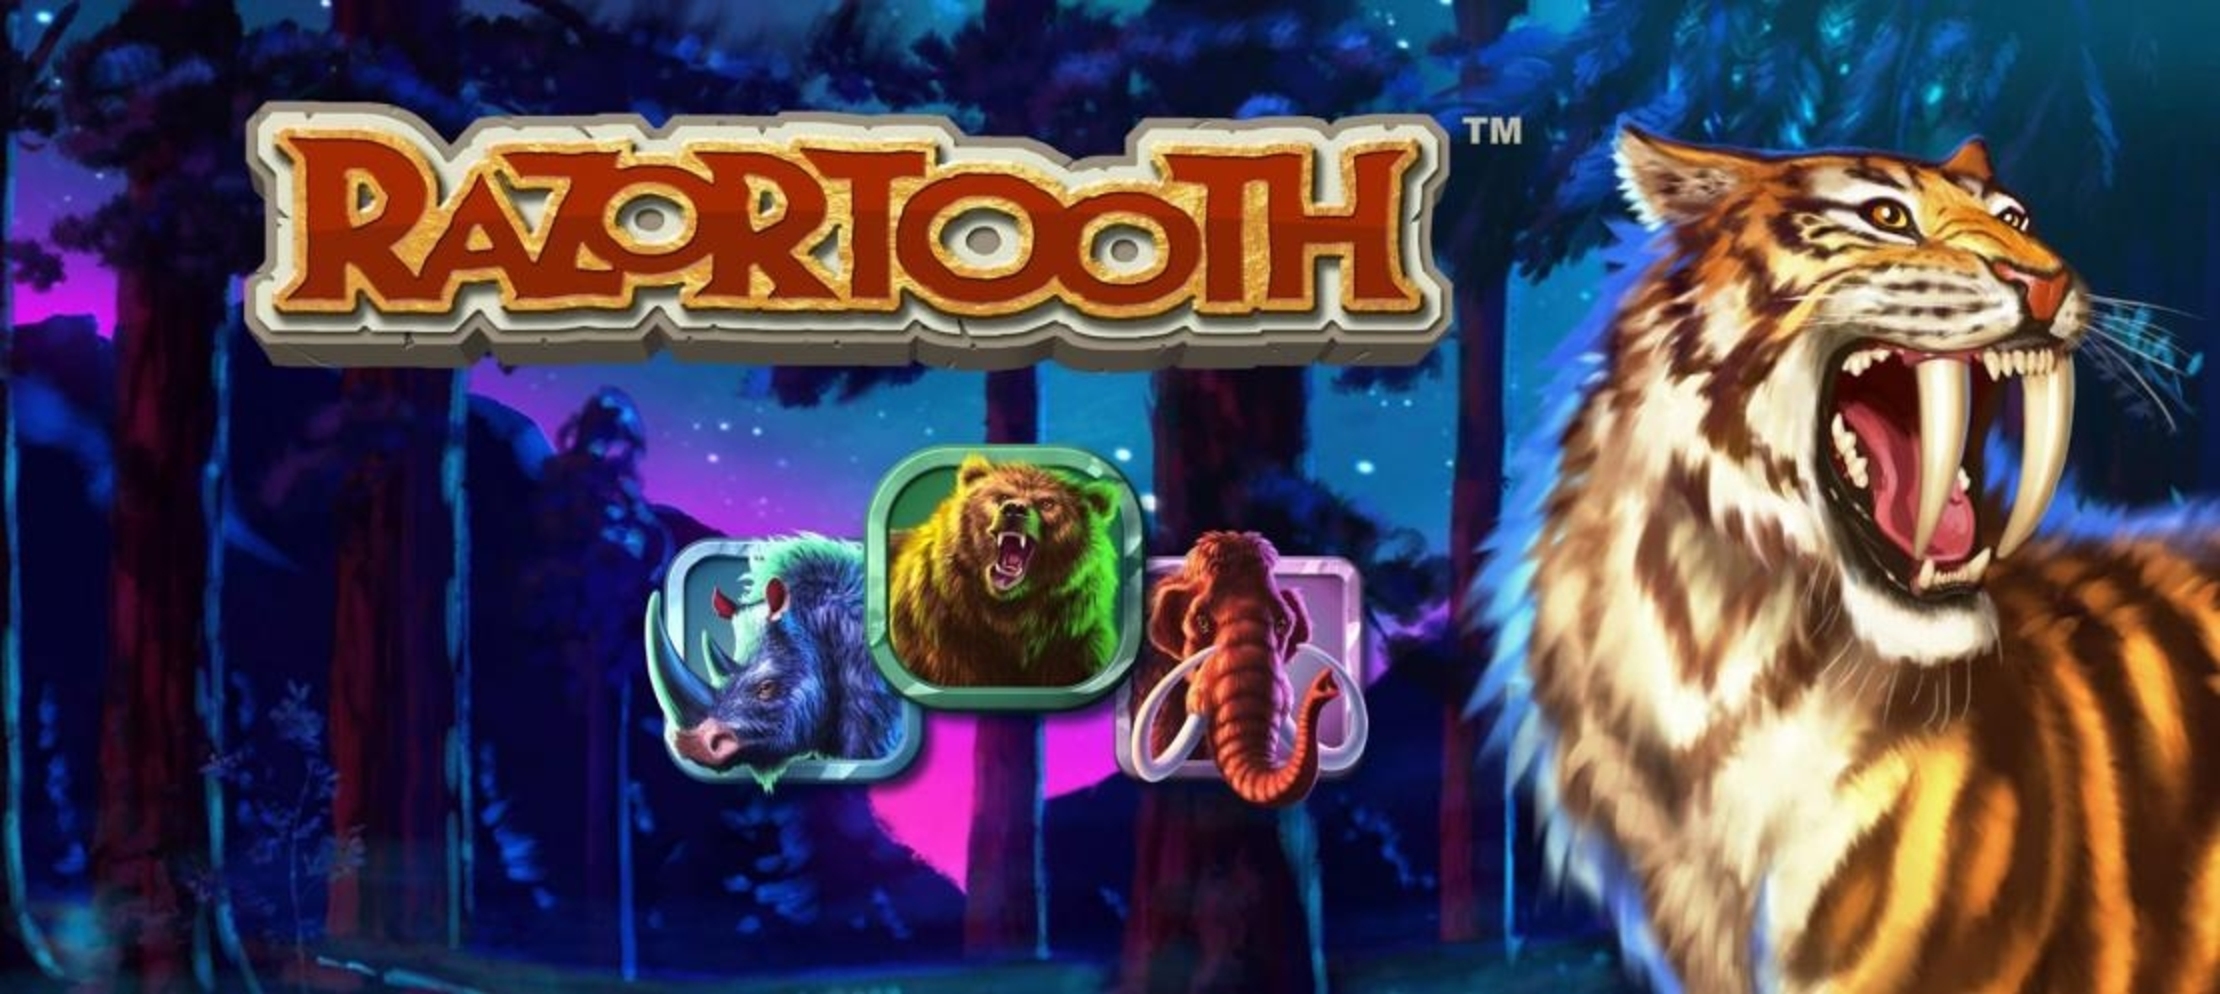 The Razortooth Online Slot Demo Game by Quickspin